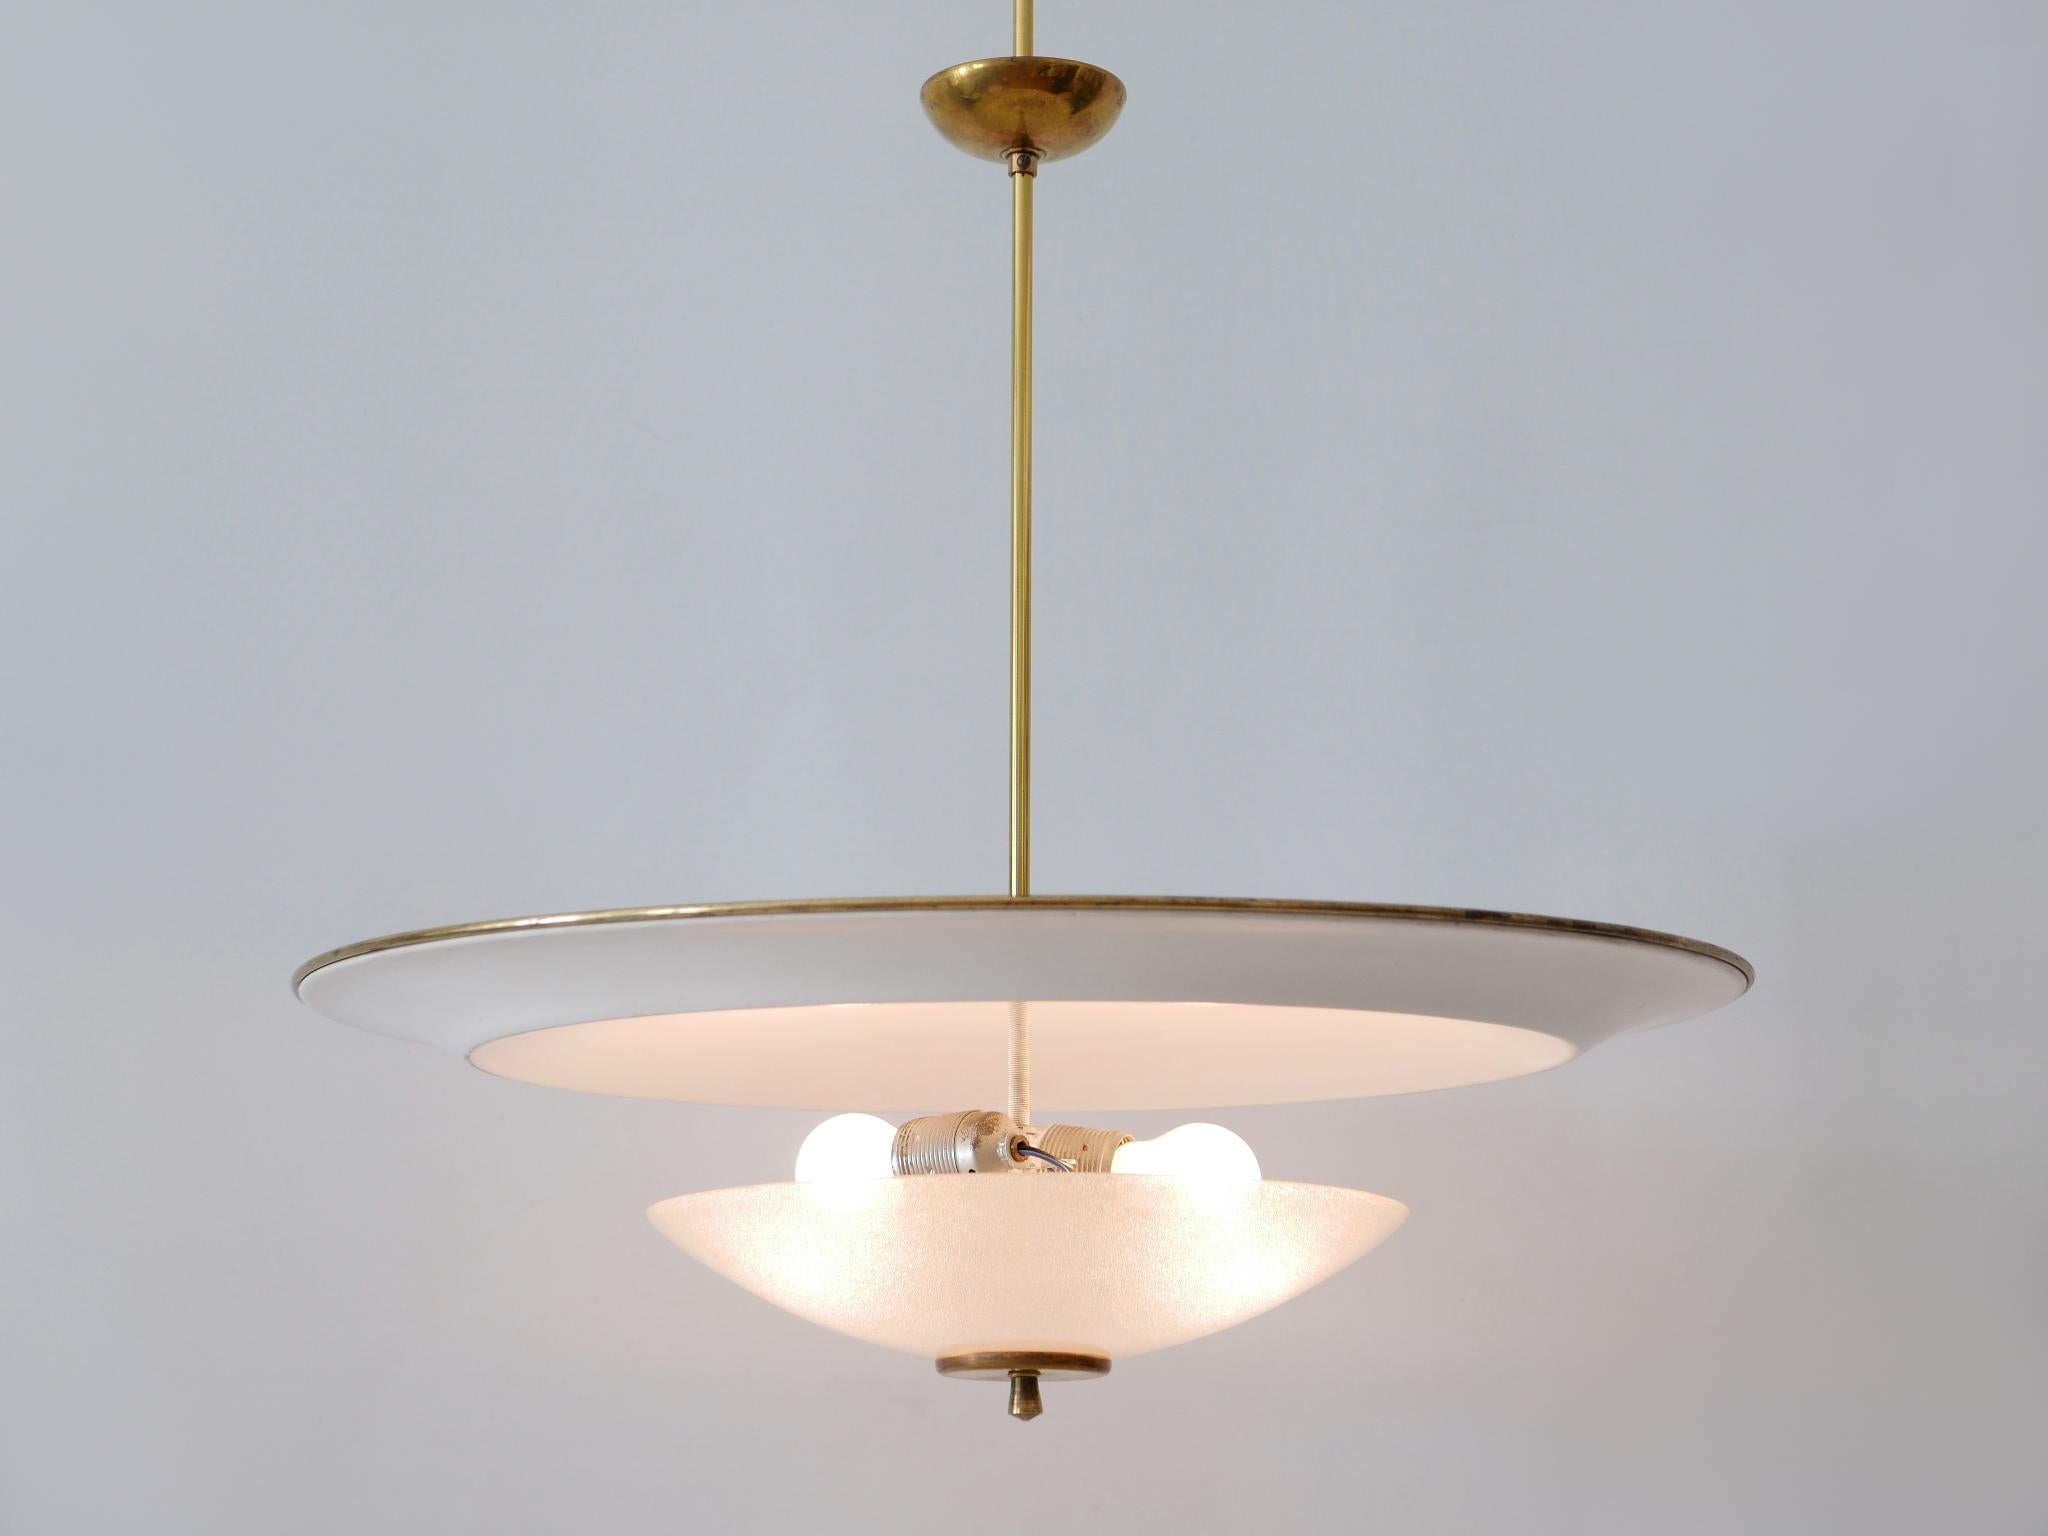 Large Mid-Century Modern 'Ufo' Ceiling Light or Pendant Lamp Germany 1950s № 2 For Sale 4